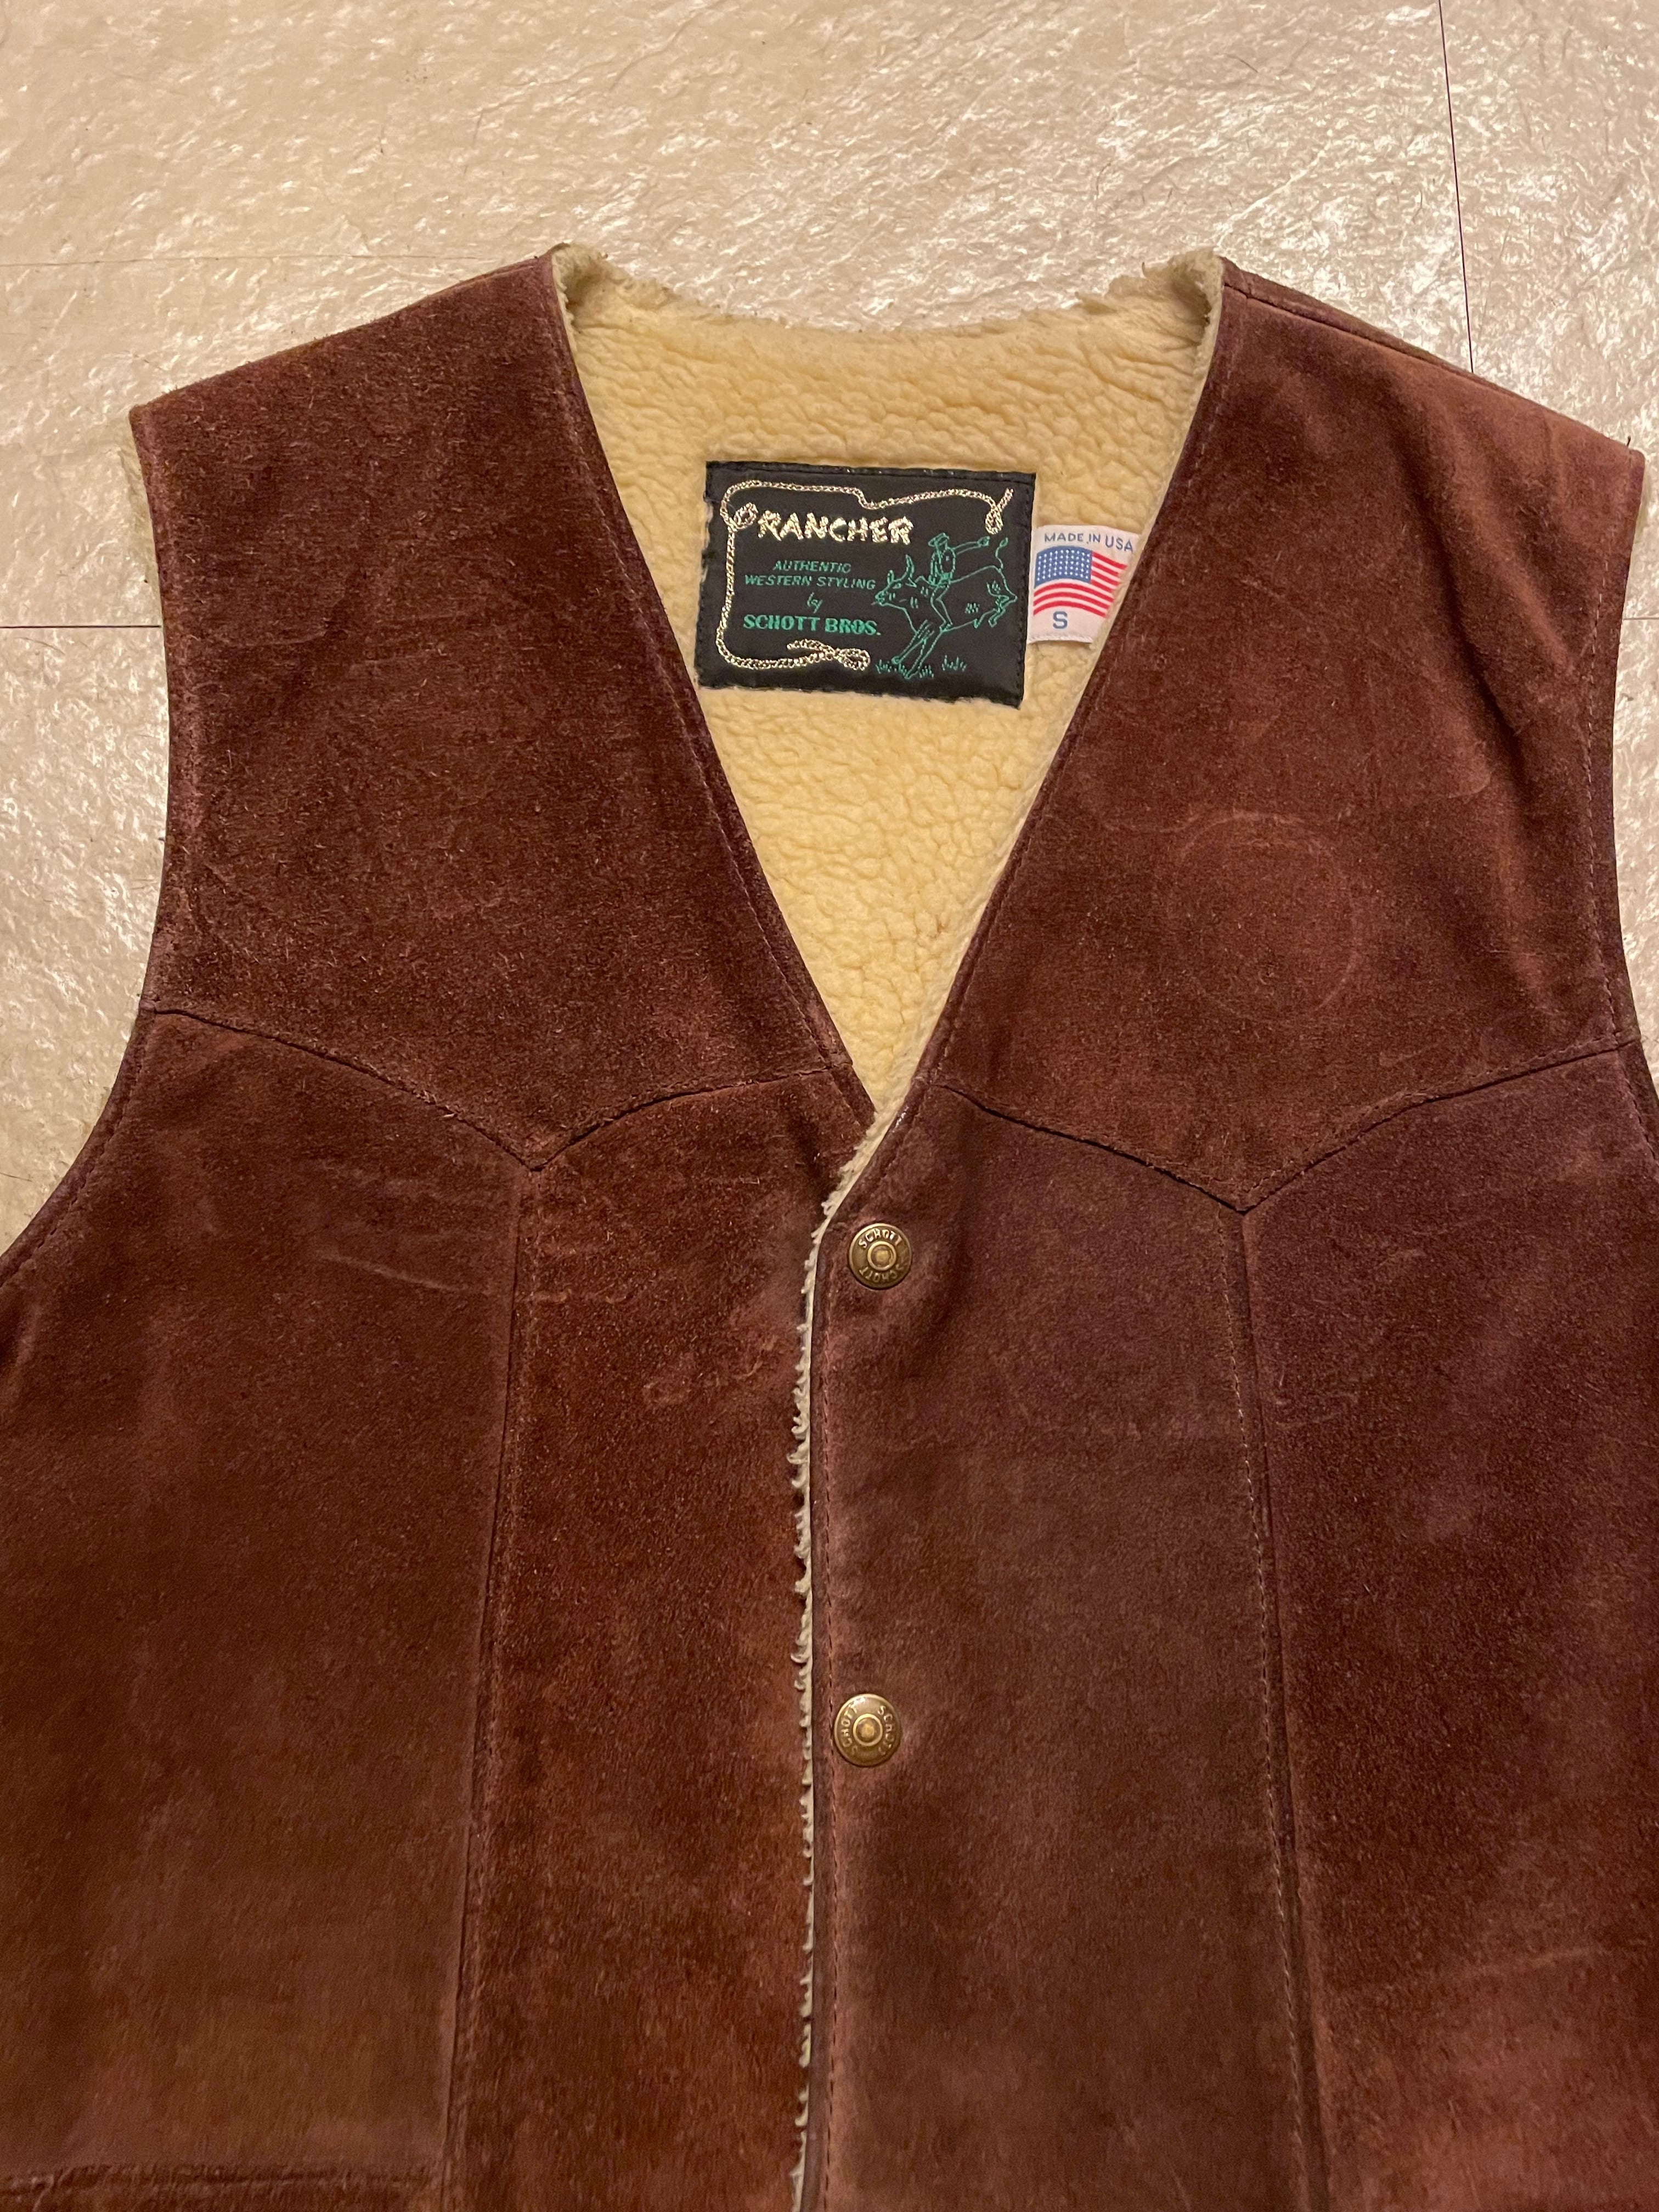 USA製!! RANCHER by SCHOTT ショット スウェード ベスト レザー 革 ボア メンズ S | Vintage Used  Clothing & CAFE/BAR “ReGARD” powered by BASE